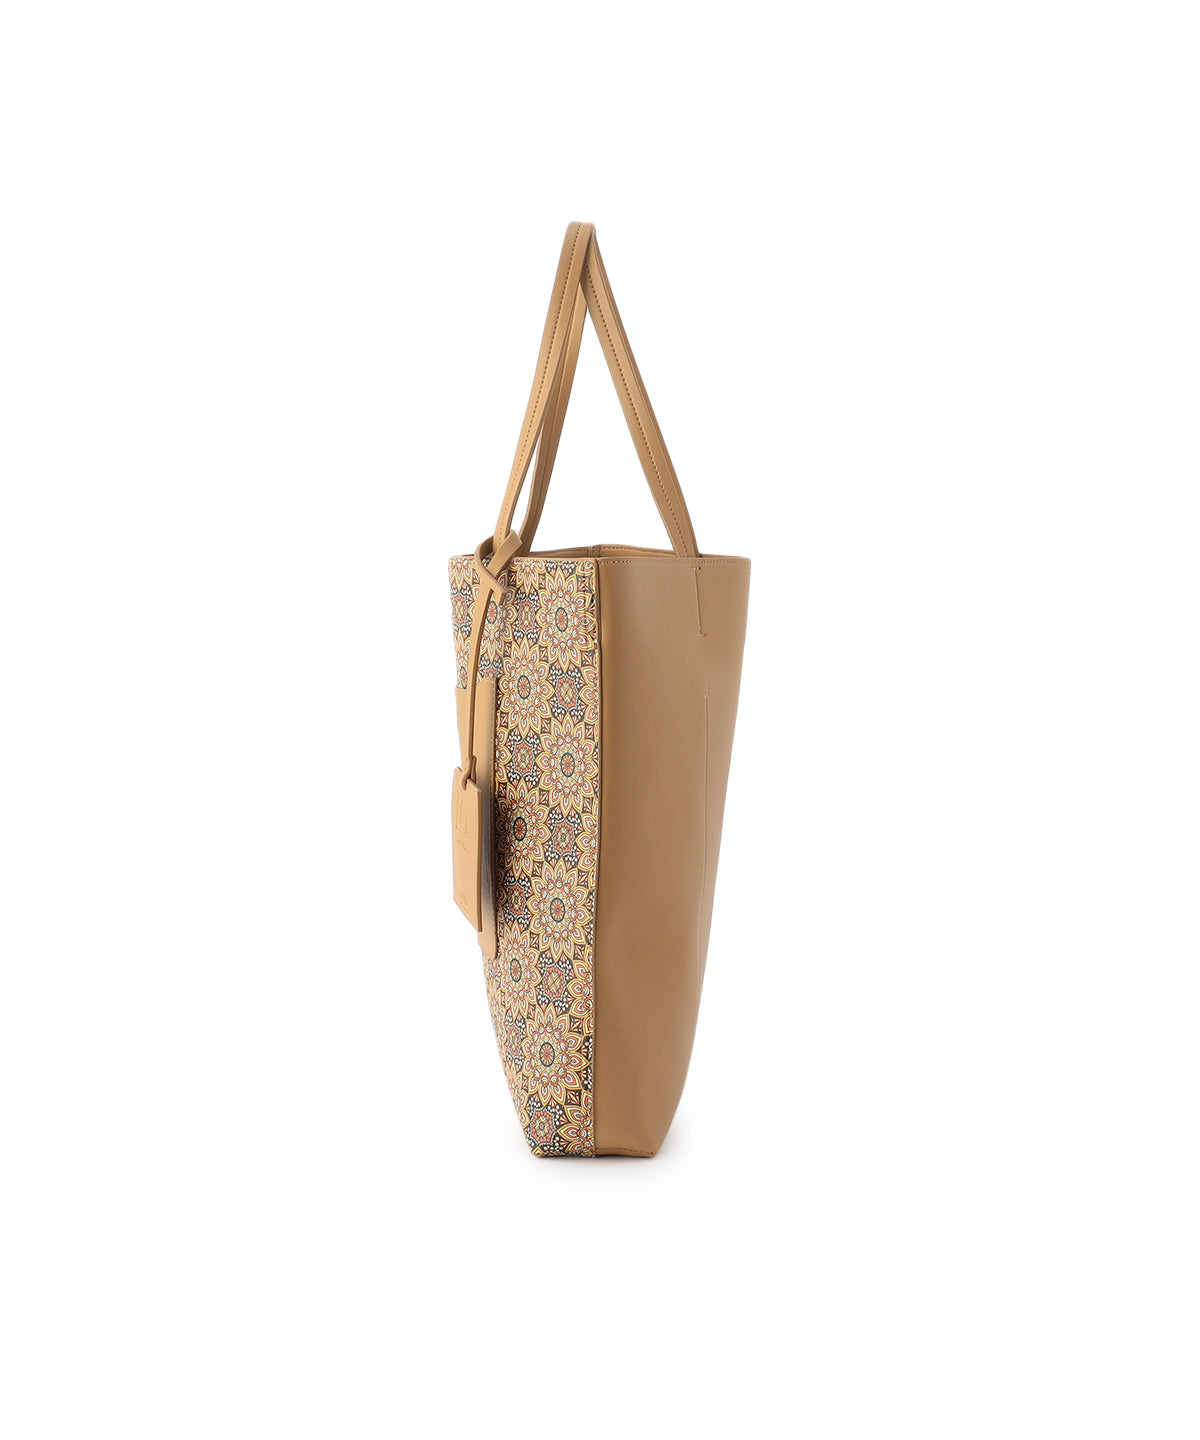 Fake Leather Printed Tote Bag (Large) BEIGE | バッグ | CLOUDY公式 